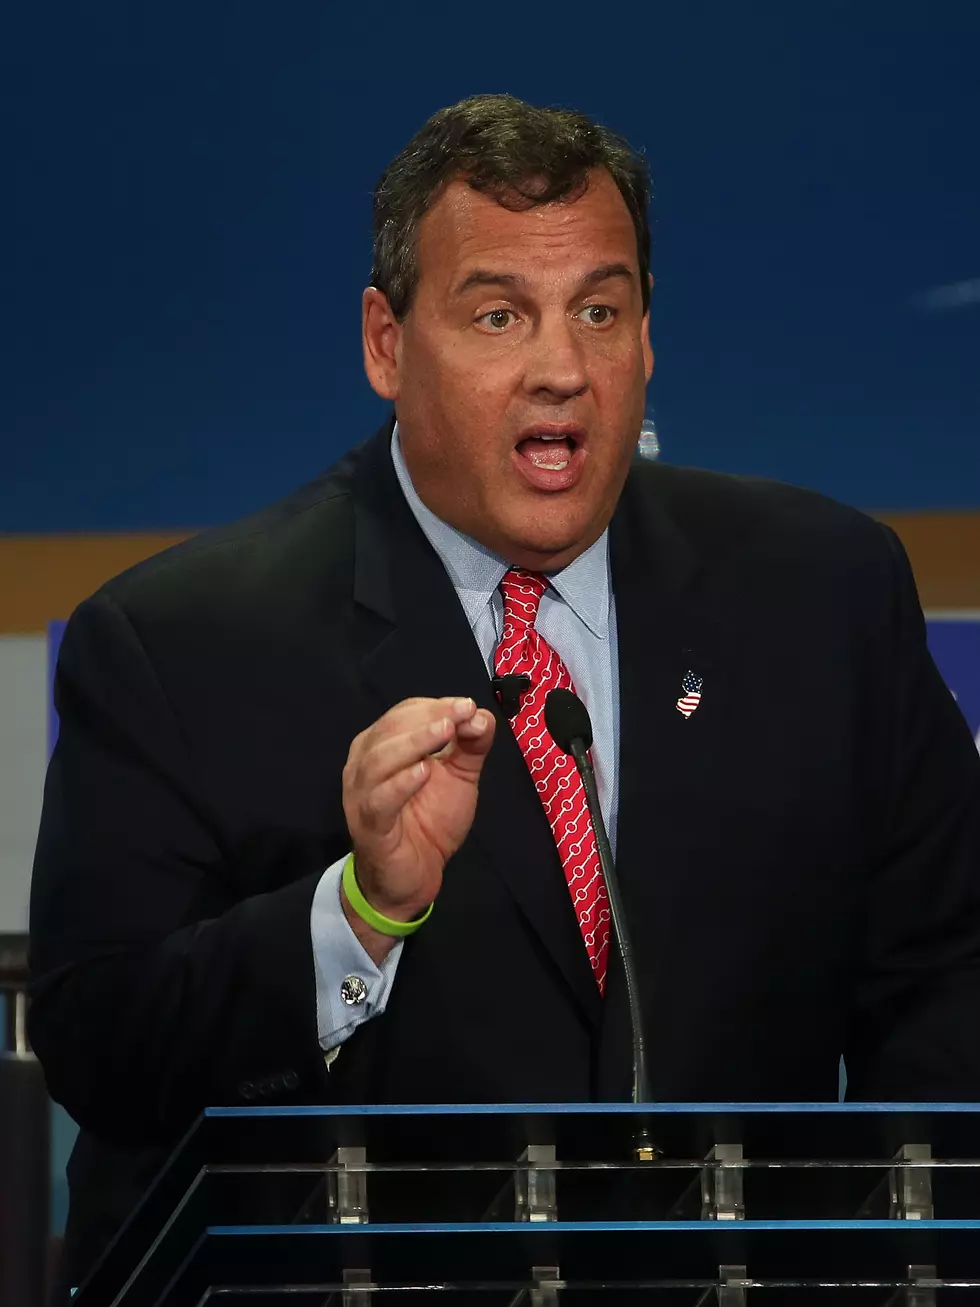 WATCH: Daily Show’s Noah Trevor presses Chris Christie on ‘FedEx’ tracking for immigrants